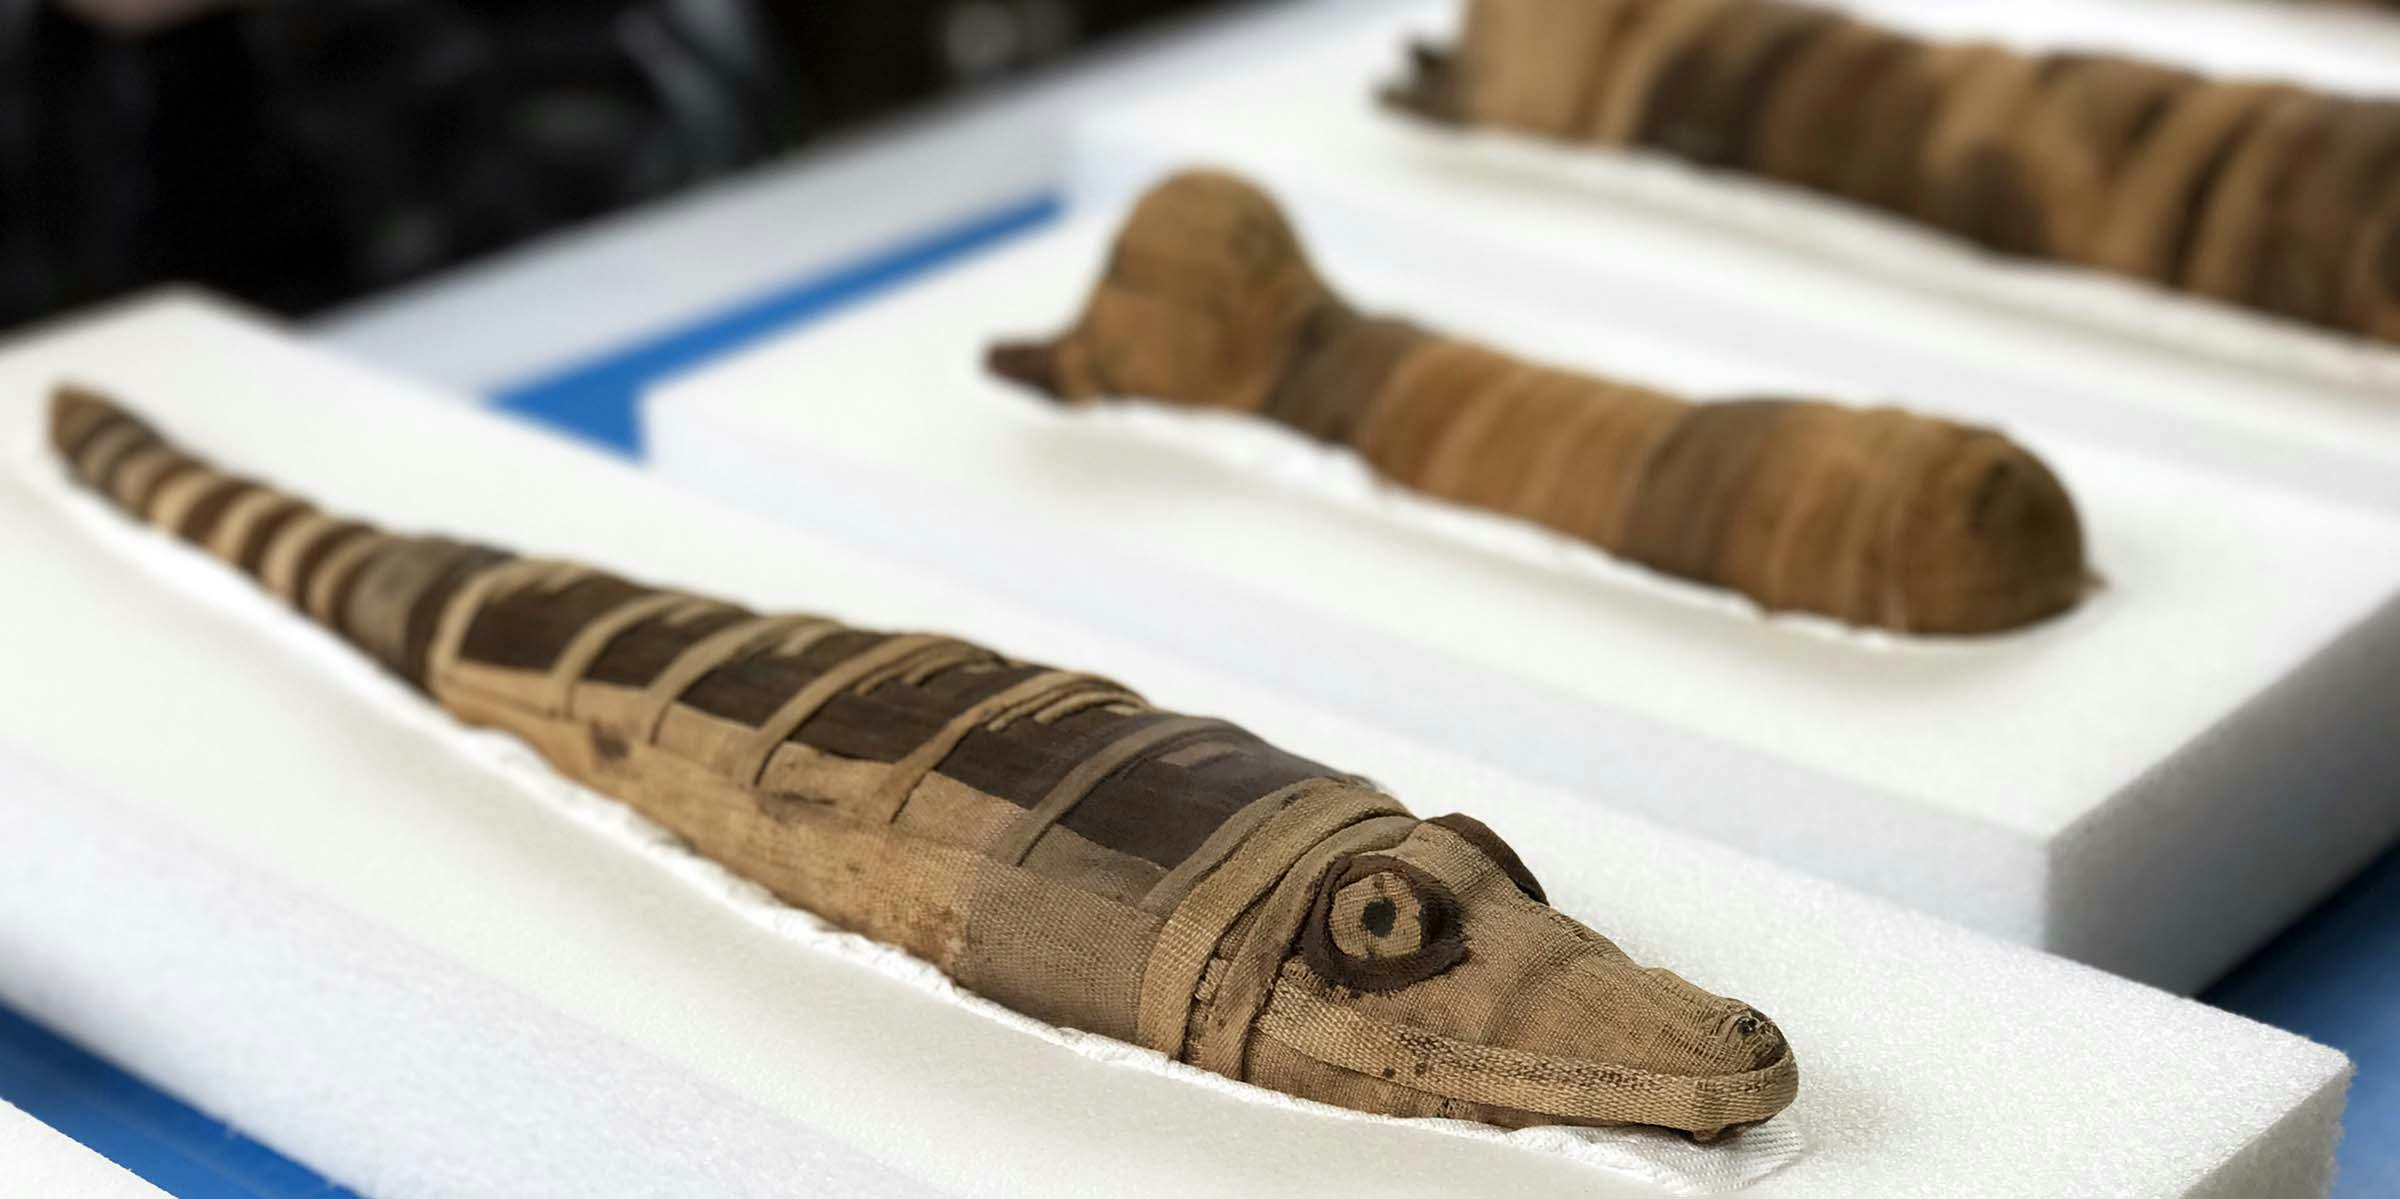 A small crocodile mummy wrapped in brown cloth with the eyes drawn on, and other similar bundles in the background